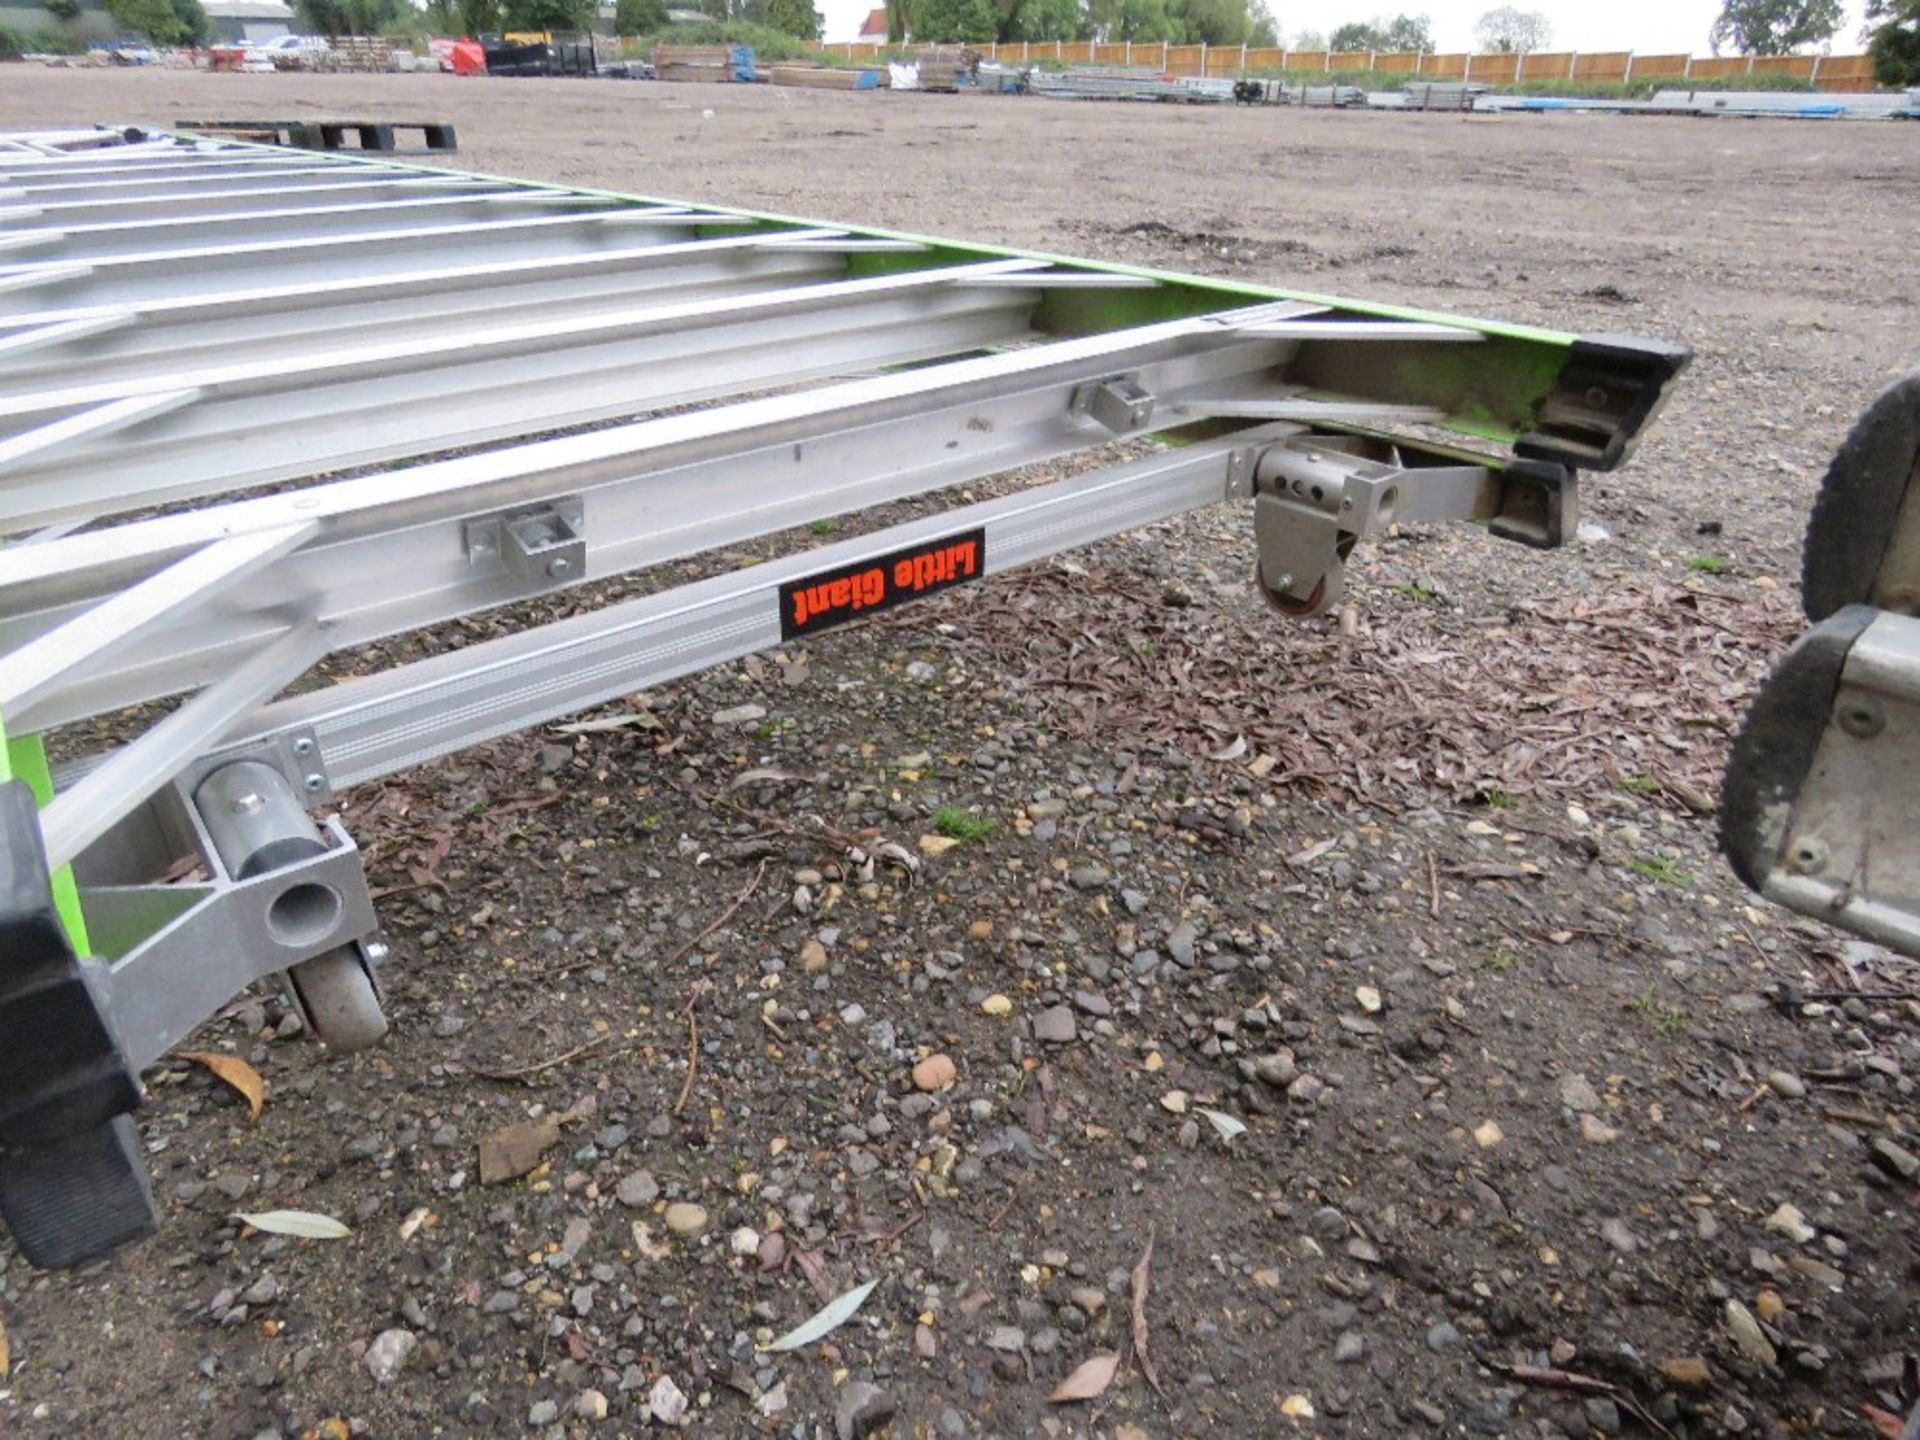 LITTLE GIANT GRP STEPS, 10 RUNG. SOURCED FROM LARGE CONSTRUCTION COMPANY LIQUIDATION. - Image 4 of 7